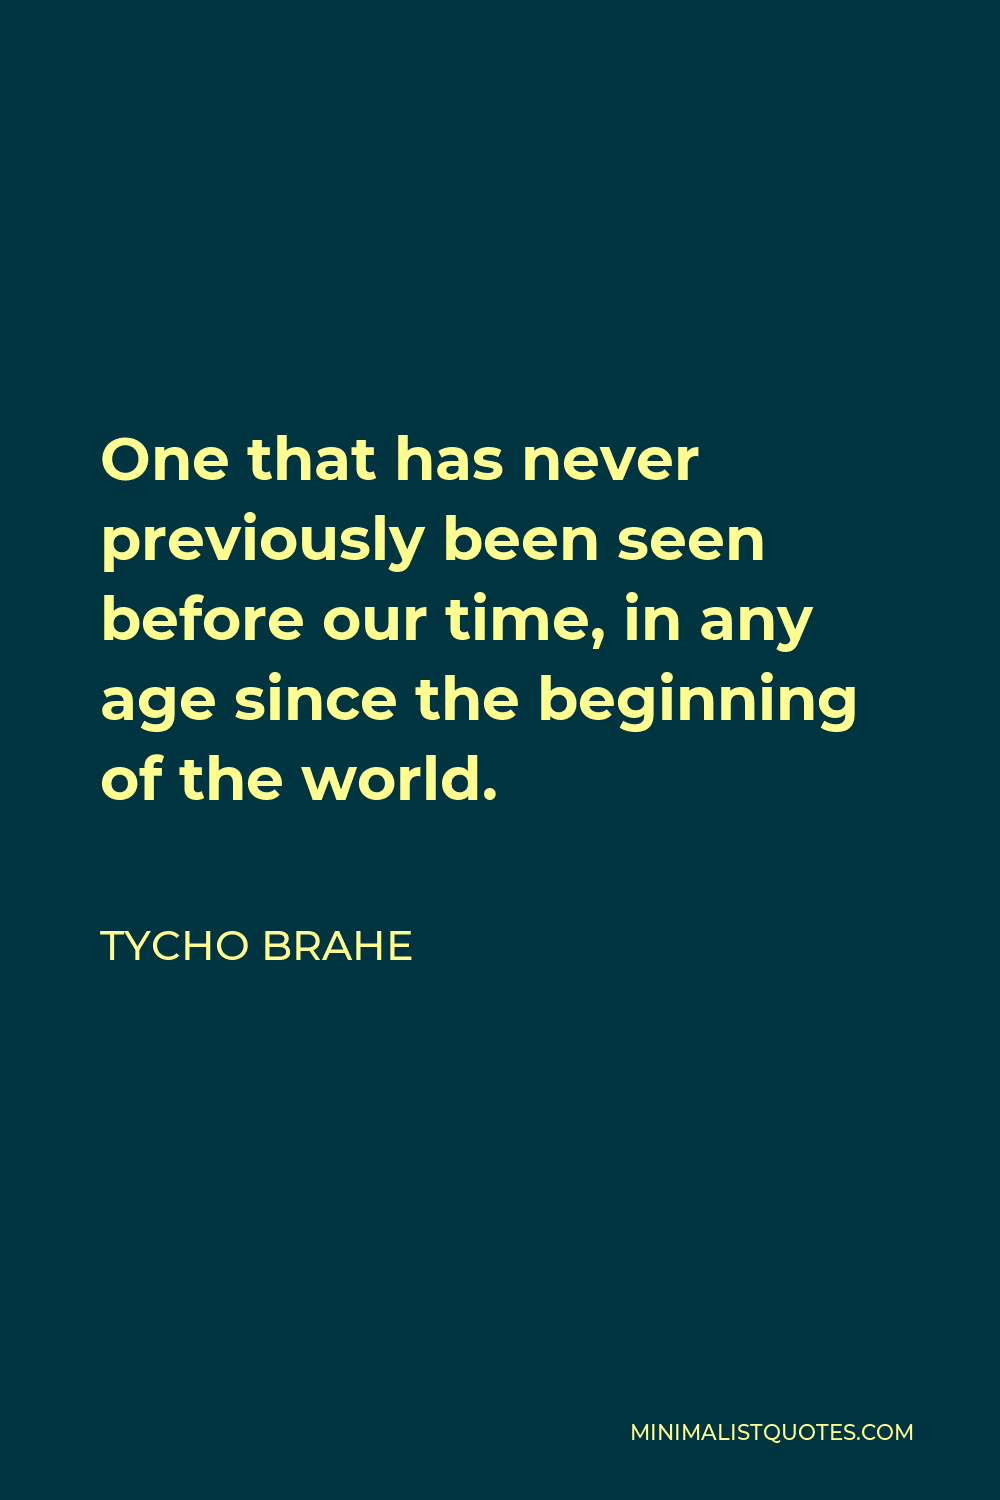 Tycho Brahe Quote - One that has never previously been seen before our time, in any age since the beginning of the world.